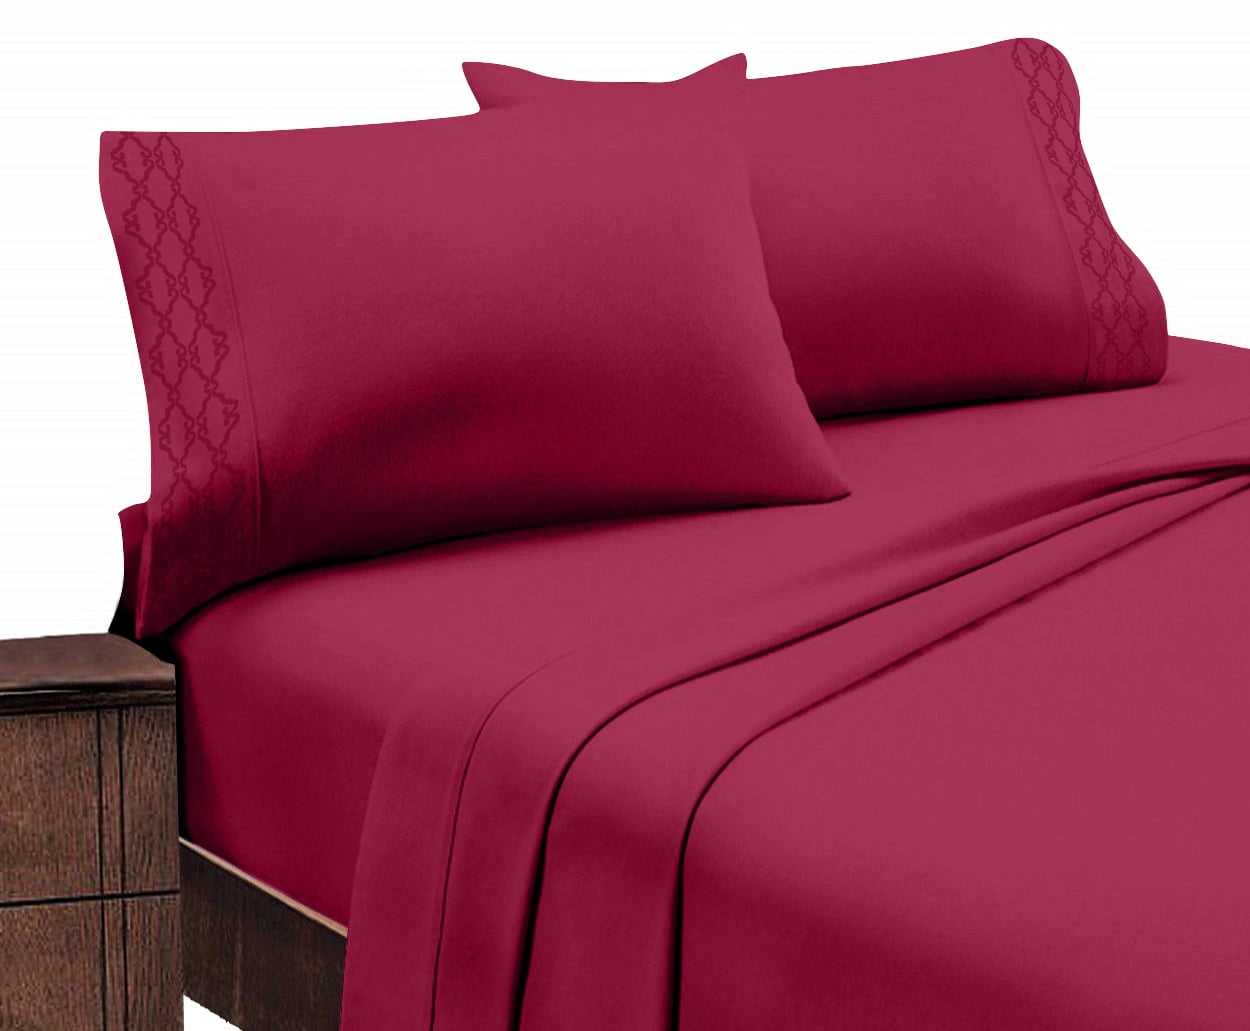 4 Foot Small Double Plain Dyed Fitted Bed Sheet or Pillow Cases  in 20 Colors 